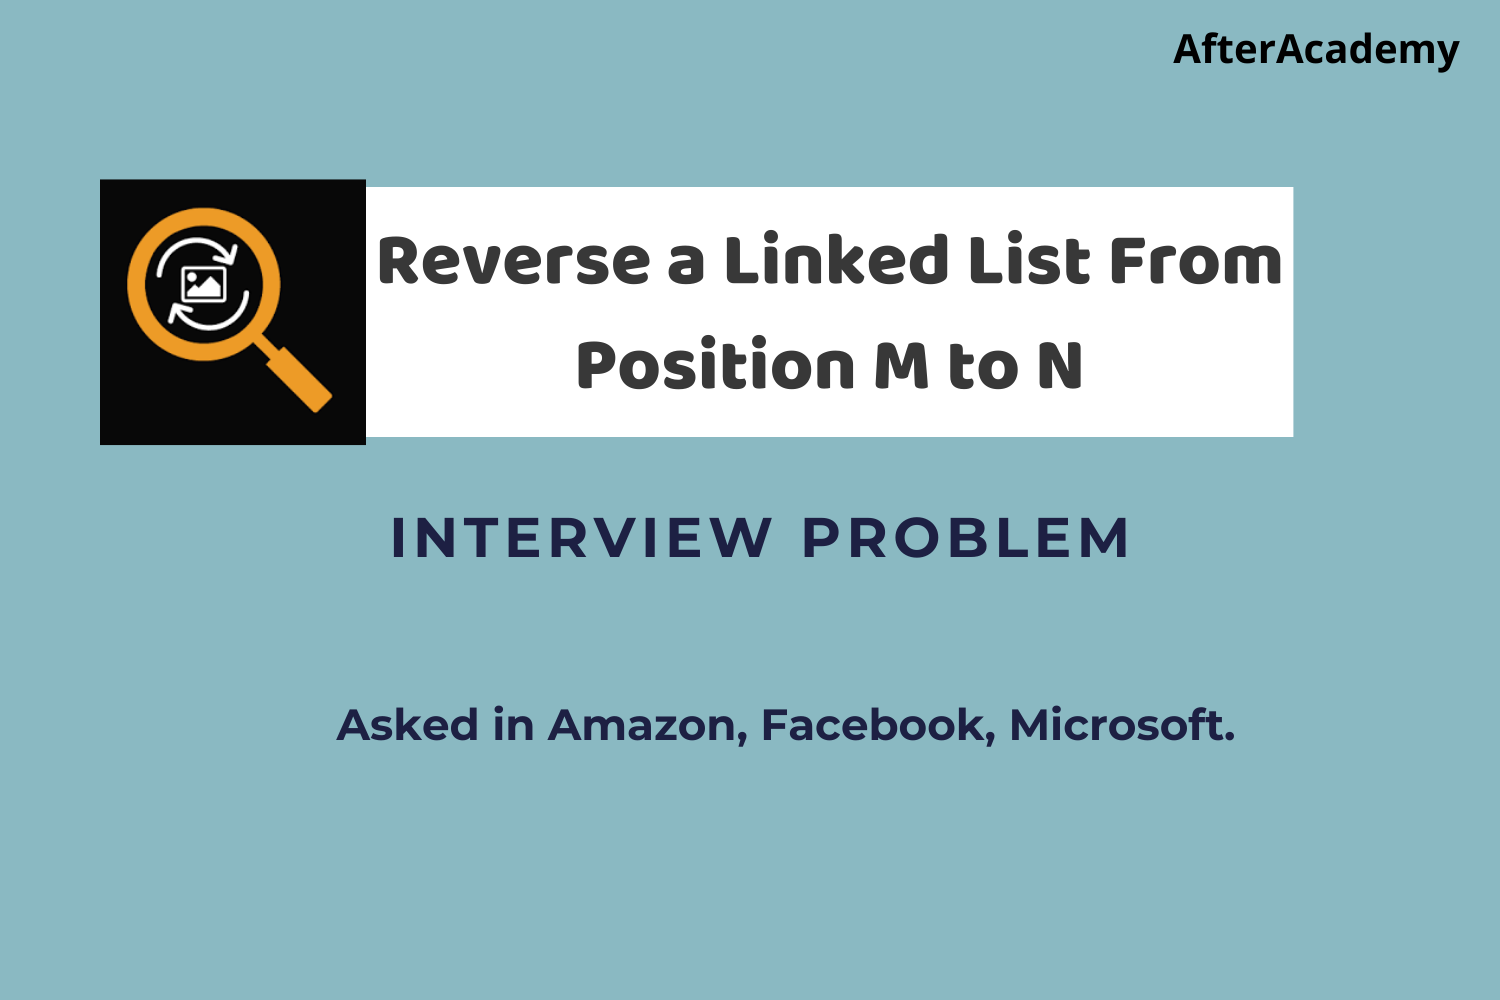 Reverse a Linked List from position M to N